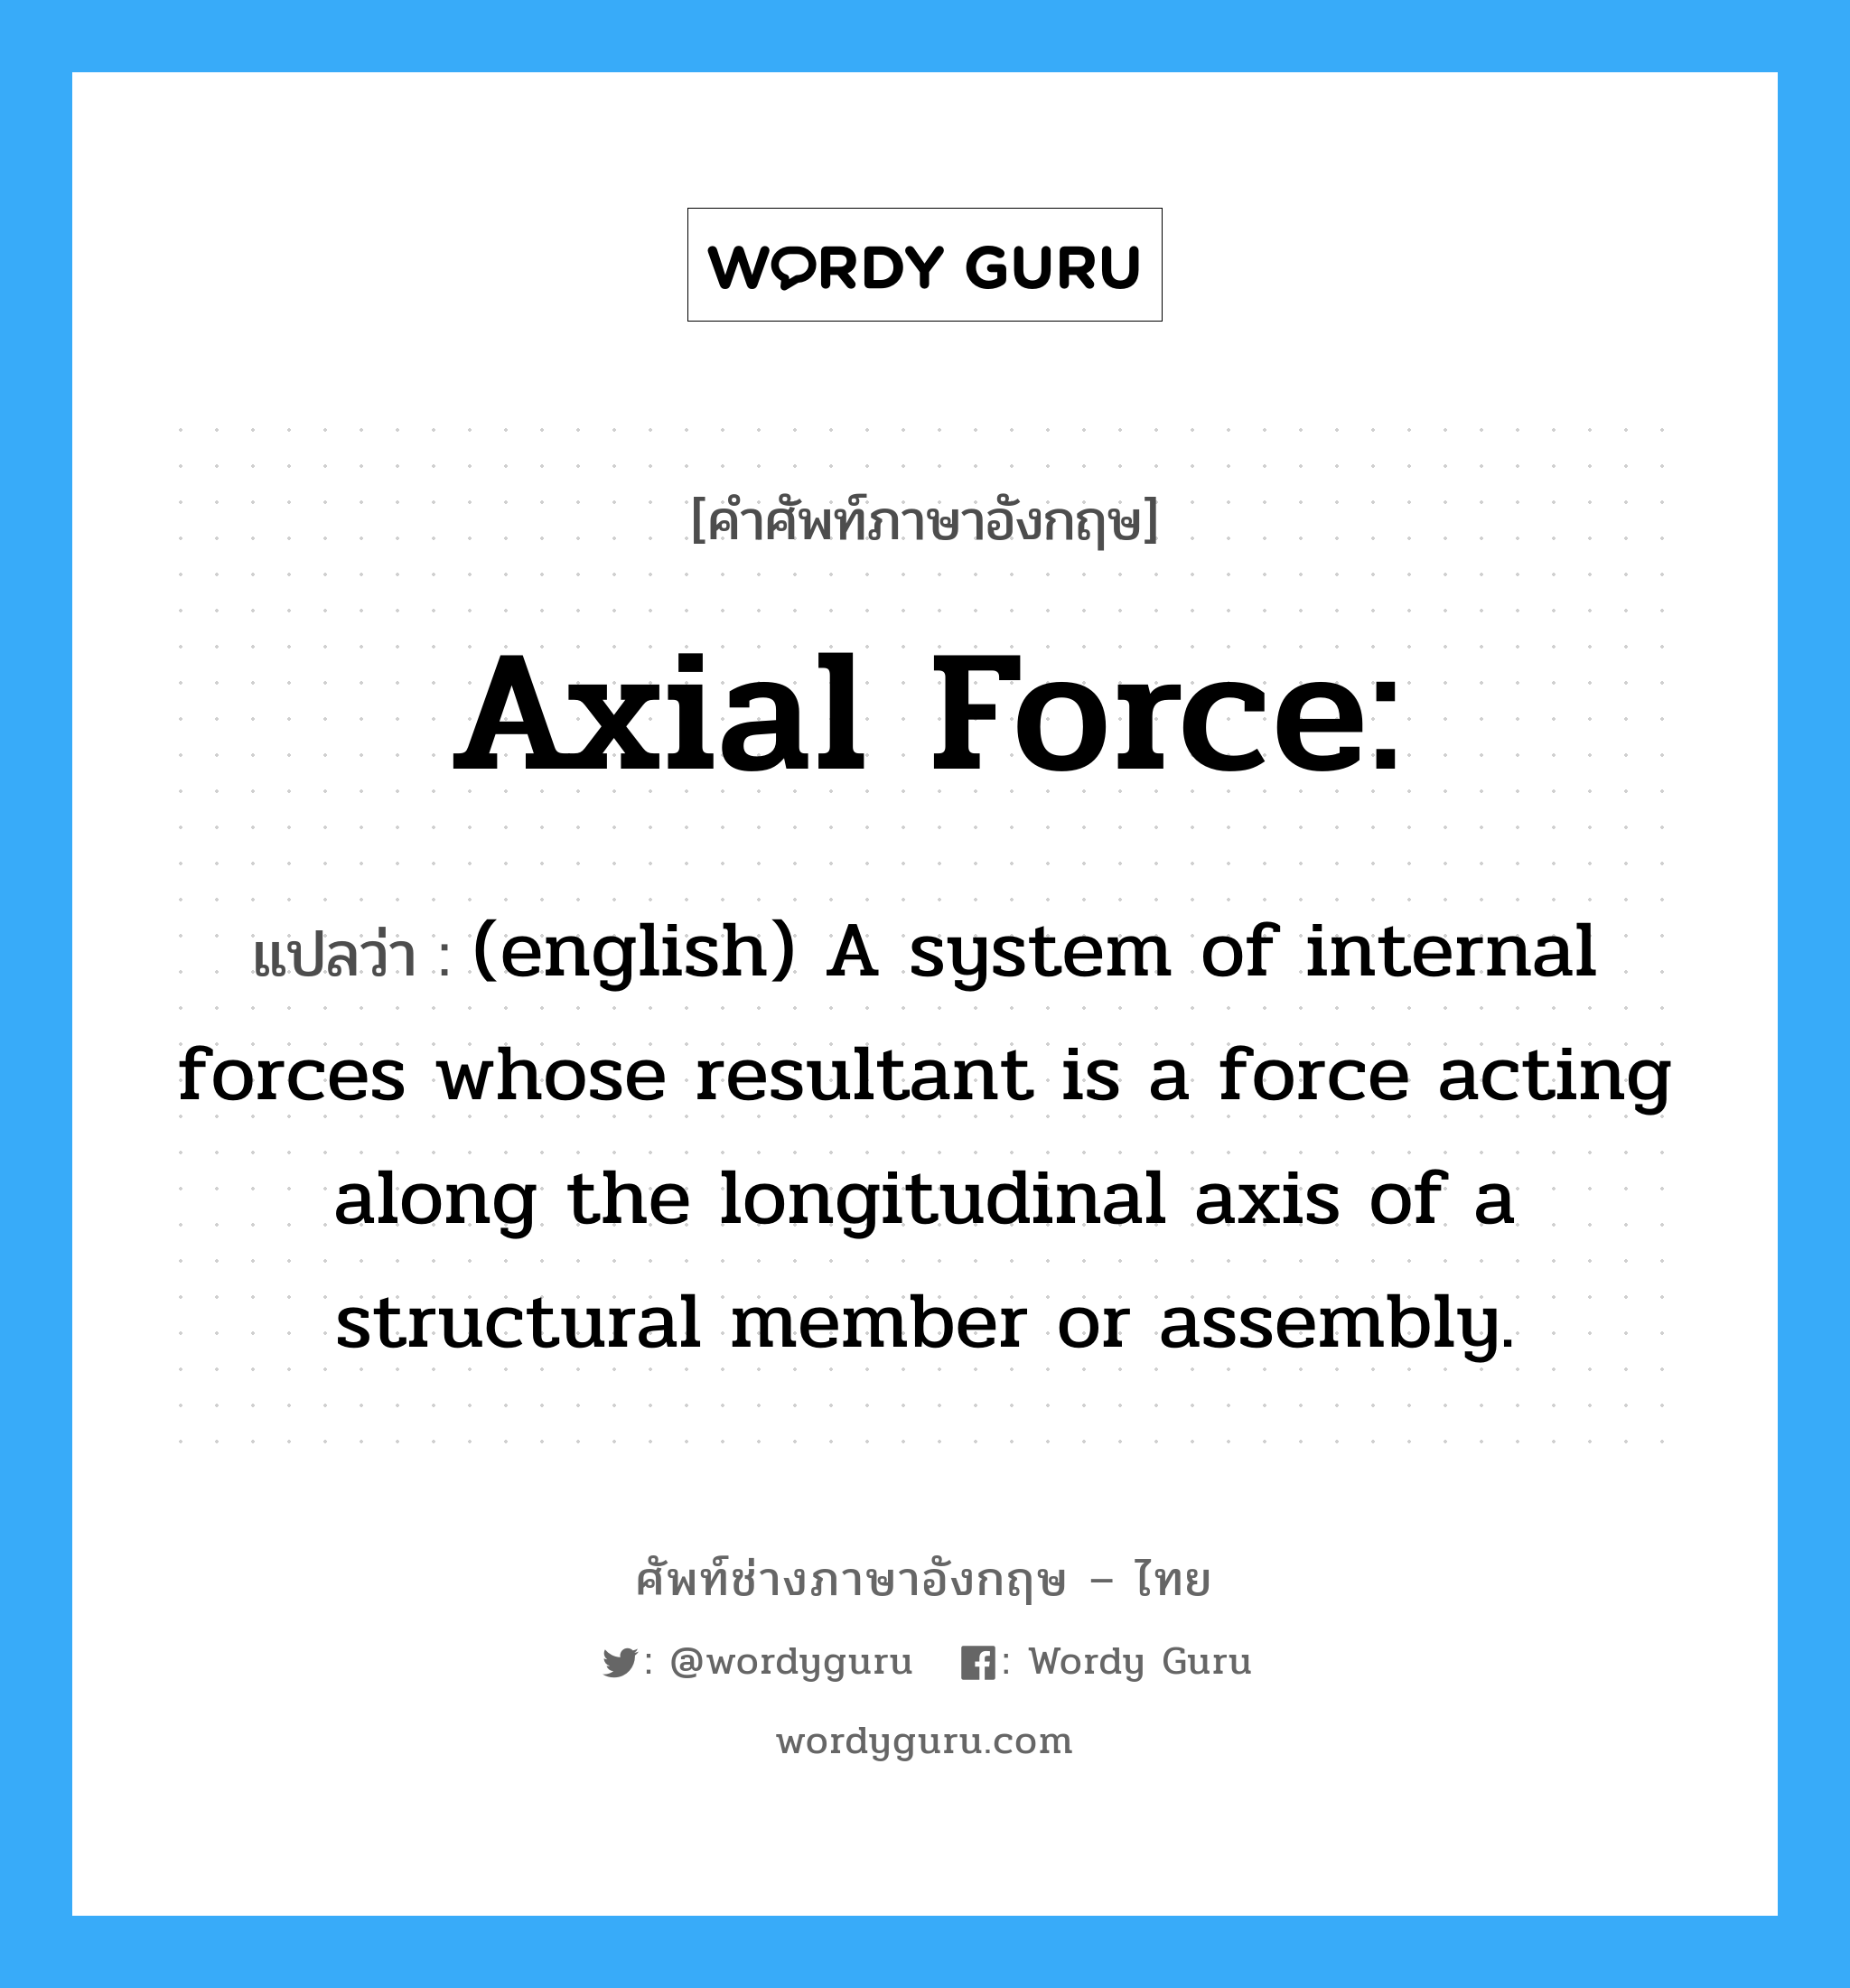 (english) A system of internal forces whose resultant is a force acting along the longitudinal axis of a structural member or assembly. ภาษาอังกฤษ?, คำศัพท์ช่างภาษาอังกฤษ - ไทย (english) A system of internal forces whose resultant is a force acting along the longitudinal axis of a structural member or assembly. คำศัพท์ภาษาอังกฤษ (english) A system of internal forces whose resultant is a force acting along the longitudinal axis of a structural member or assembly. แปลว่า Axial force: